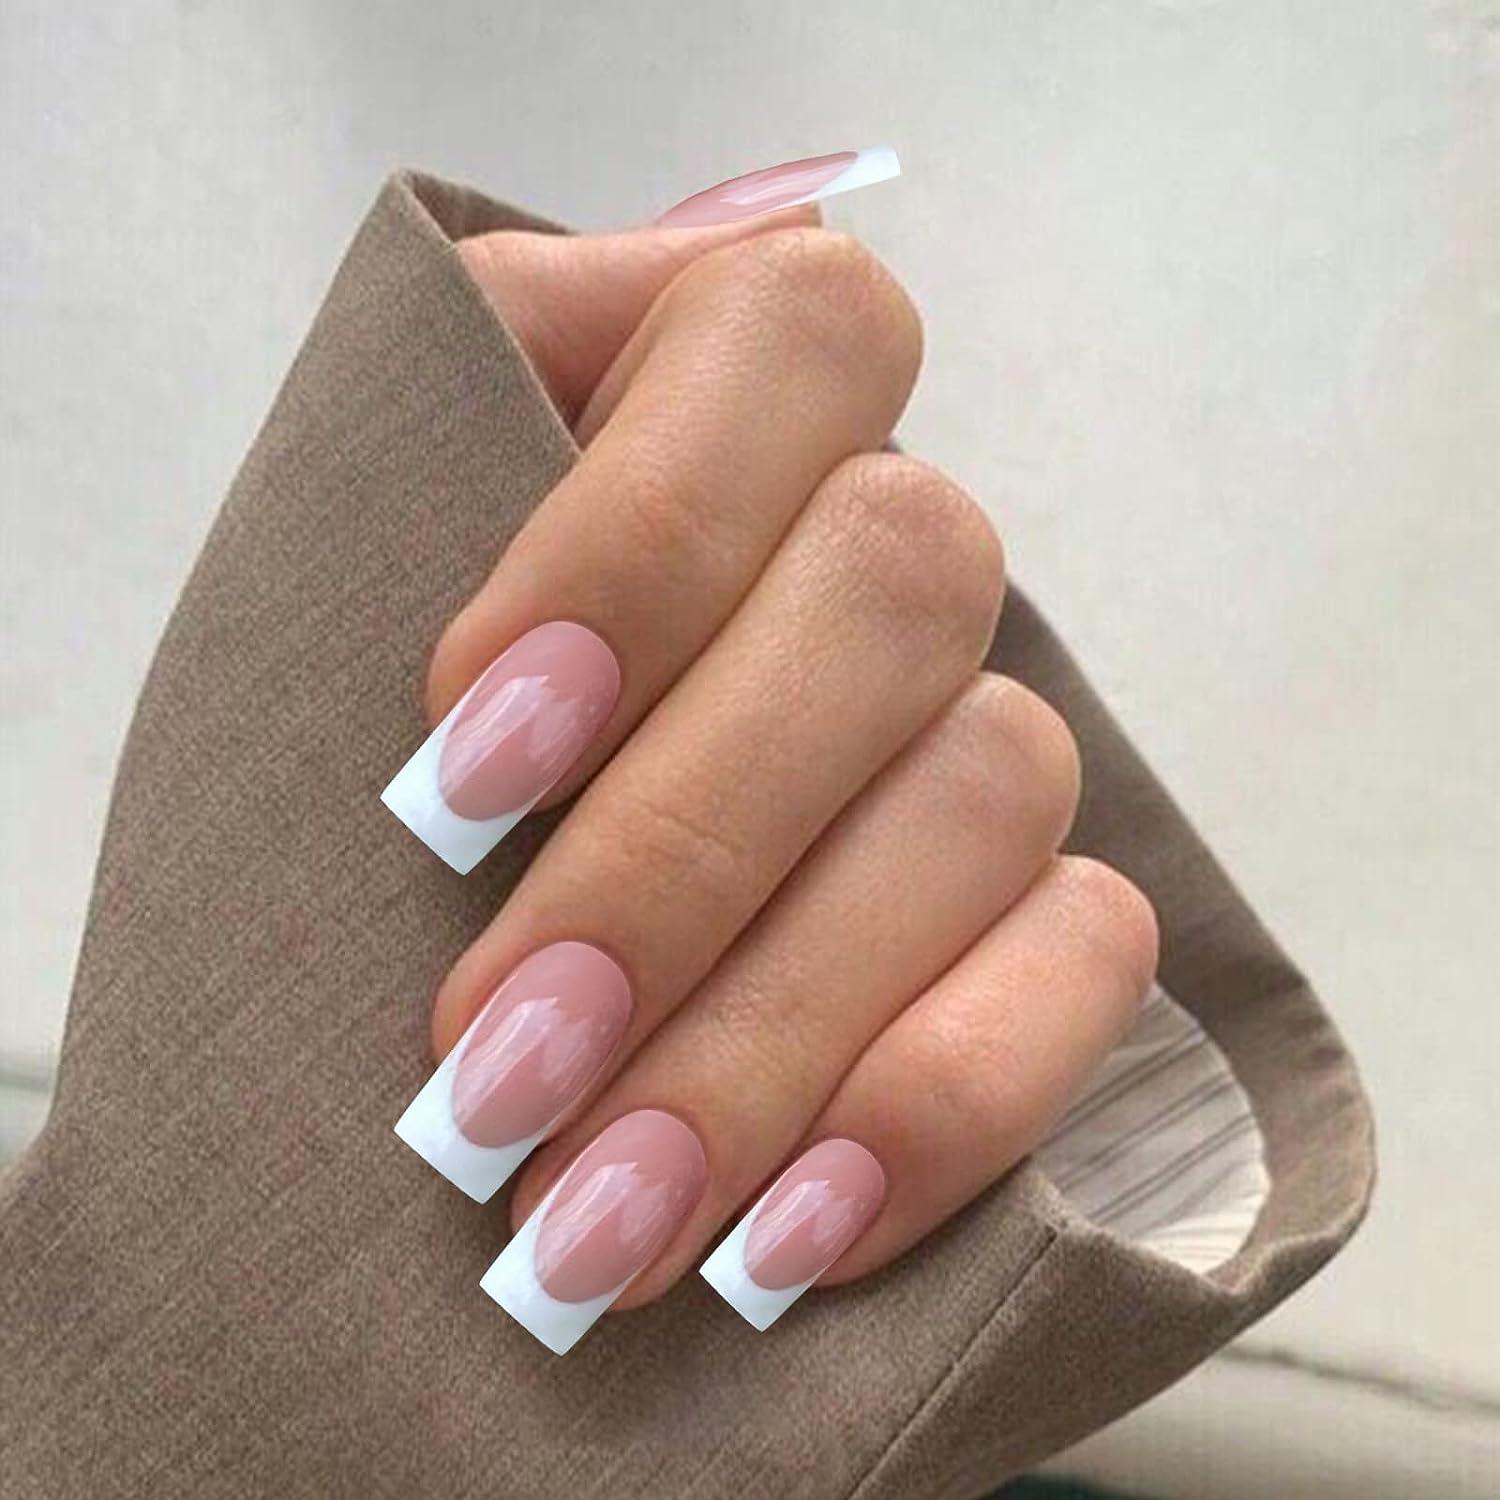 24 PCS Press on Nails Medium Length with Designs Chic Fashion Long Fake  Coffin Nails with Glue French Tip Acrylic Nails Ballerina - Walmart.com